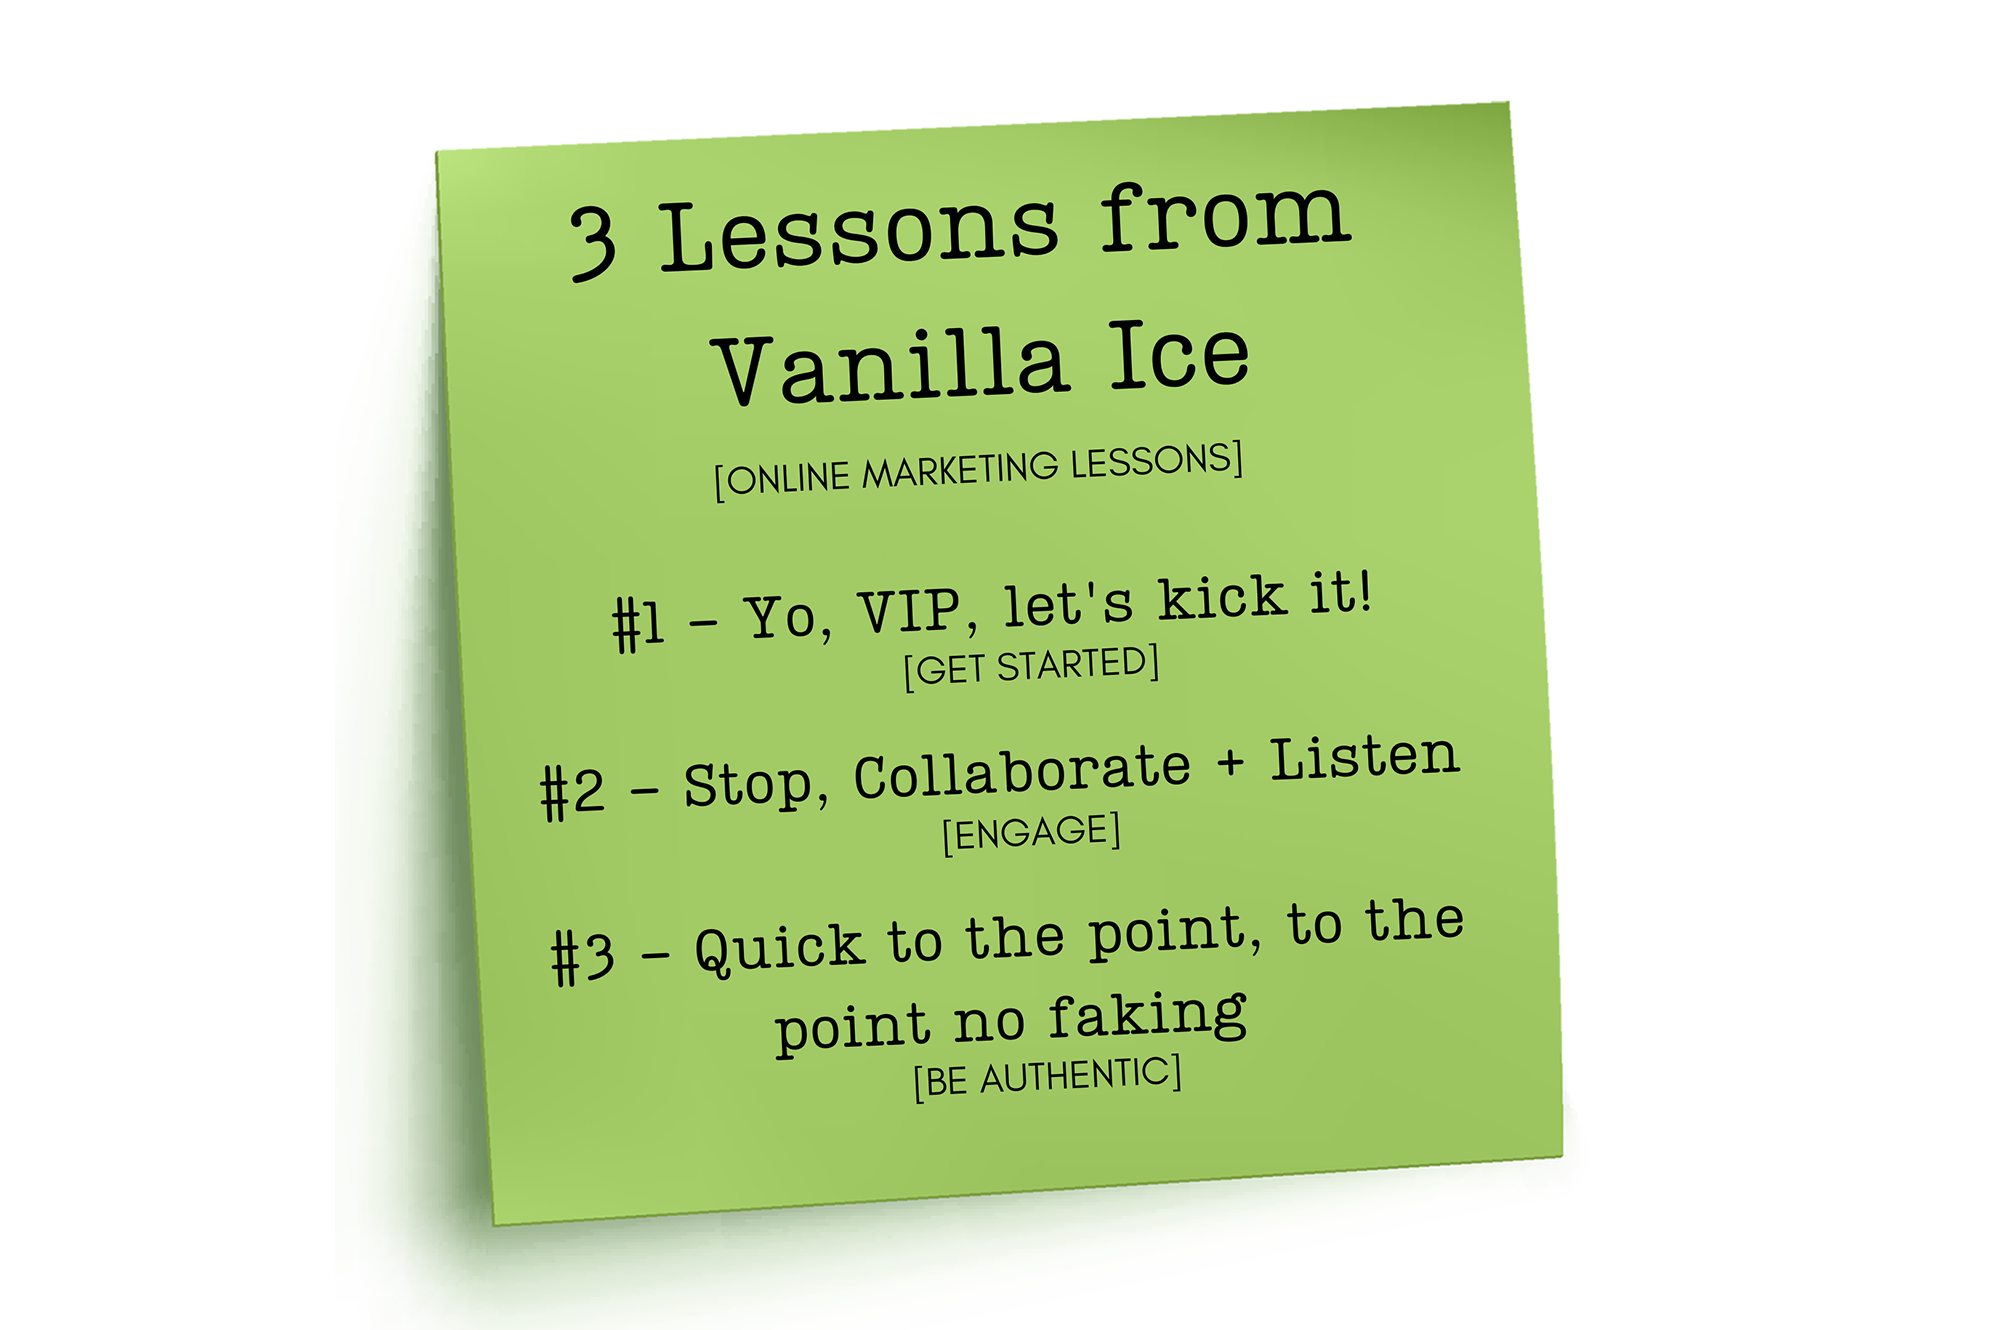 3 Online Marketing Lessons from Vanilla Ice